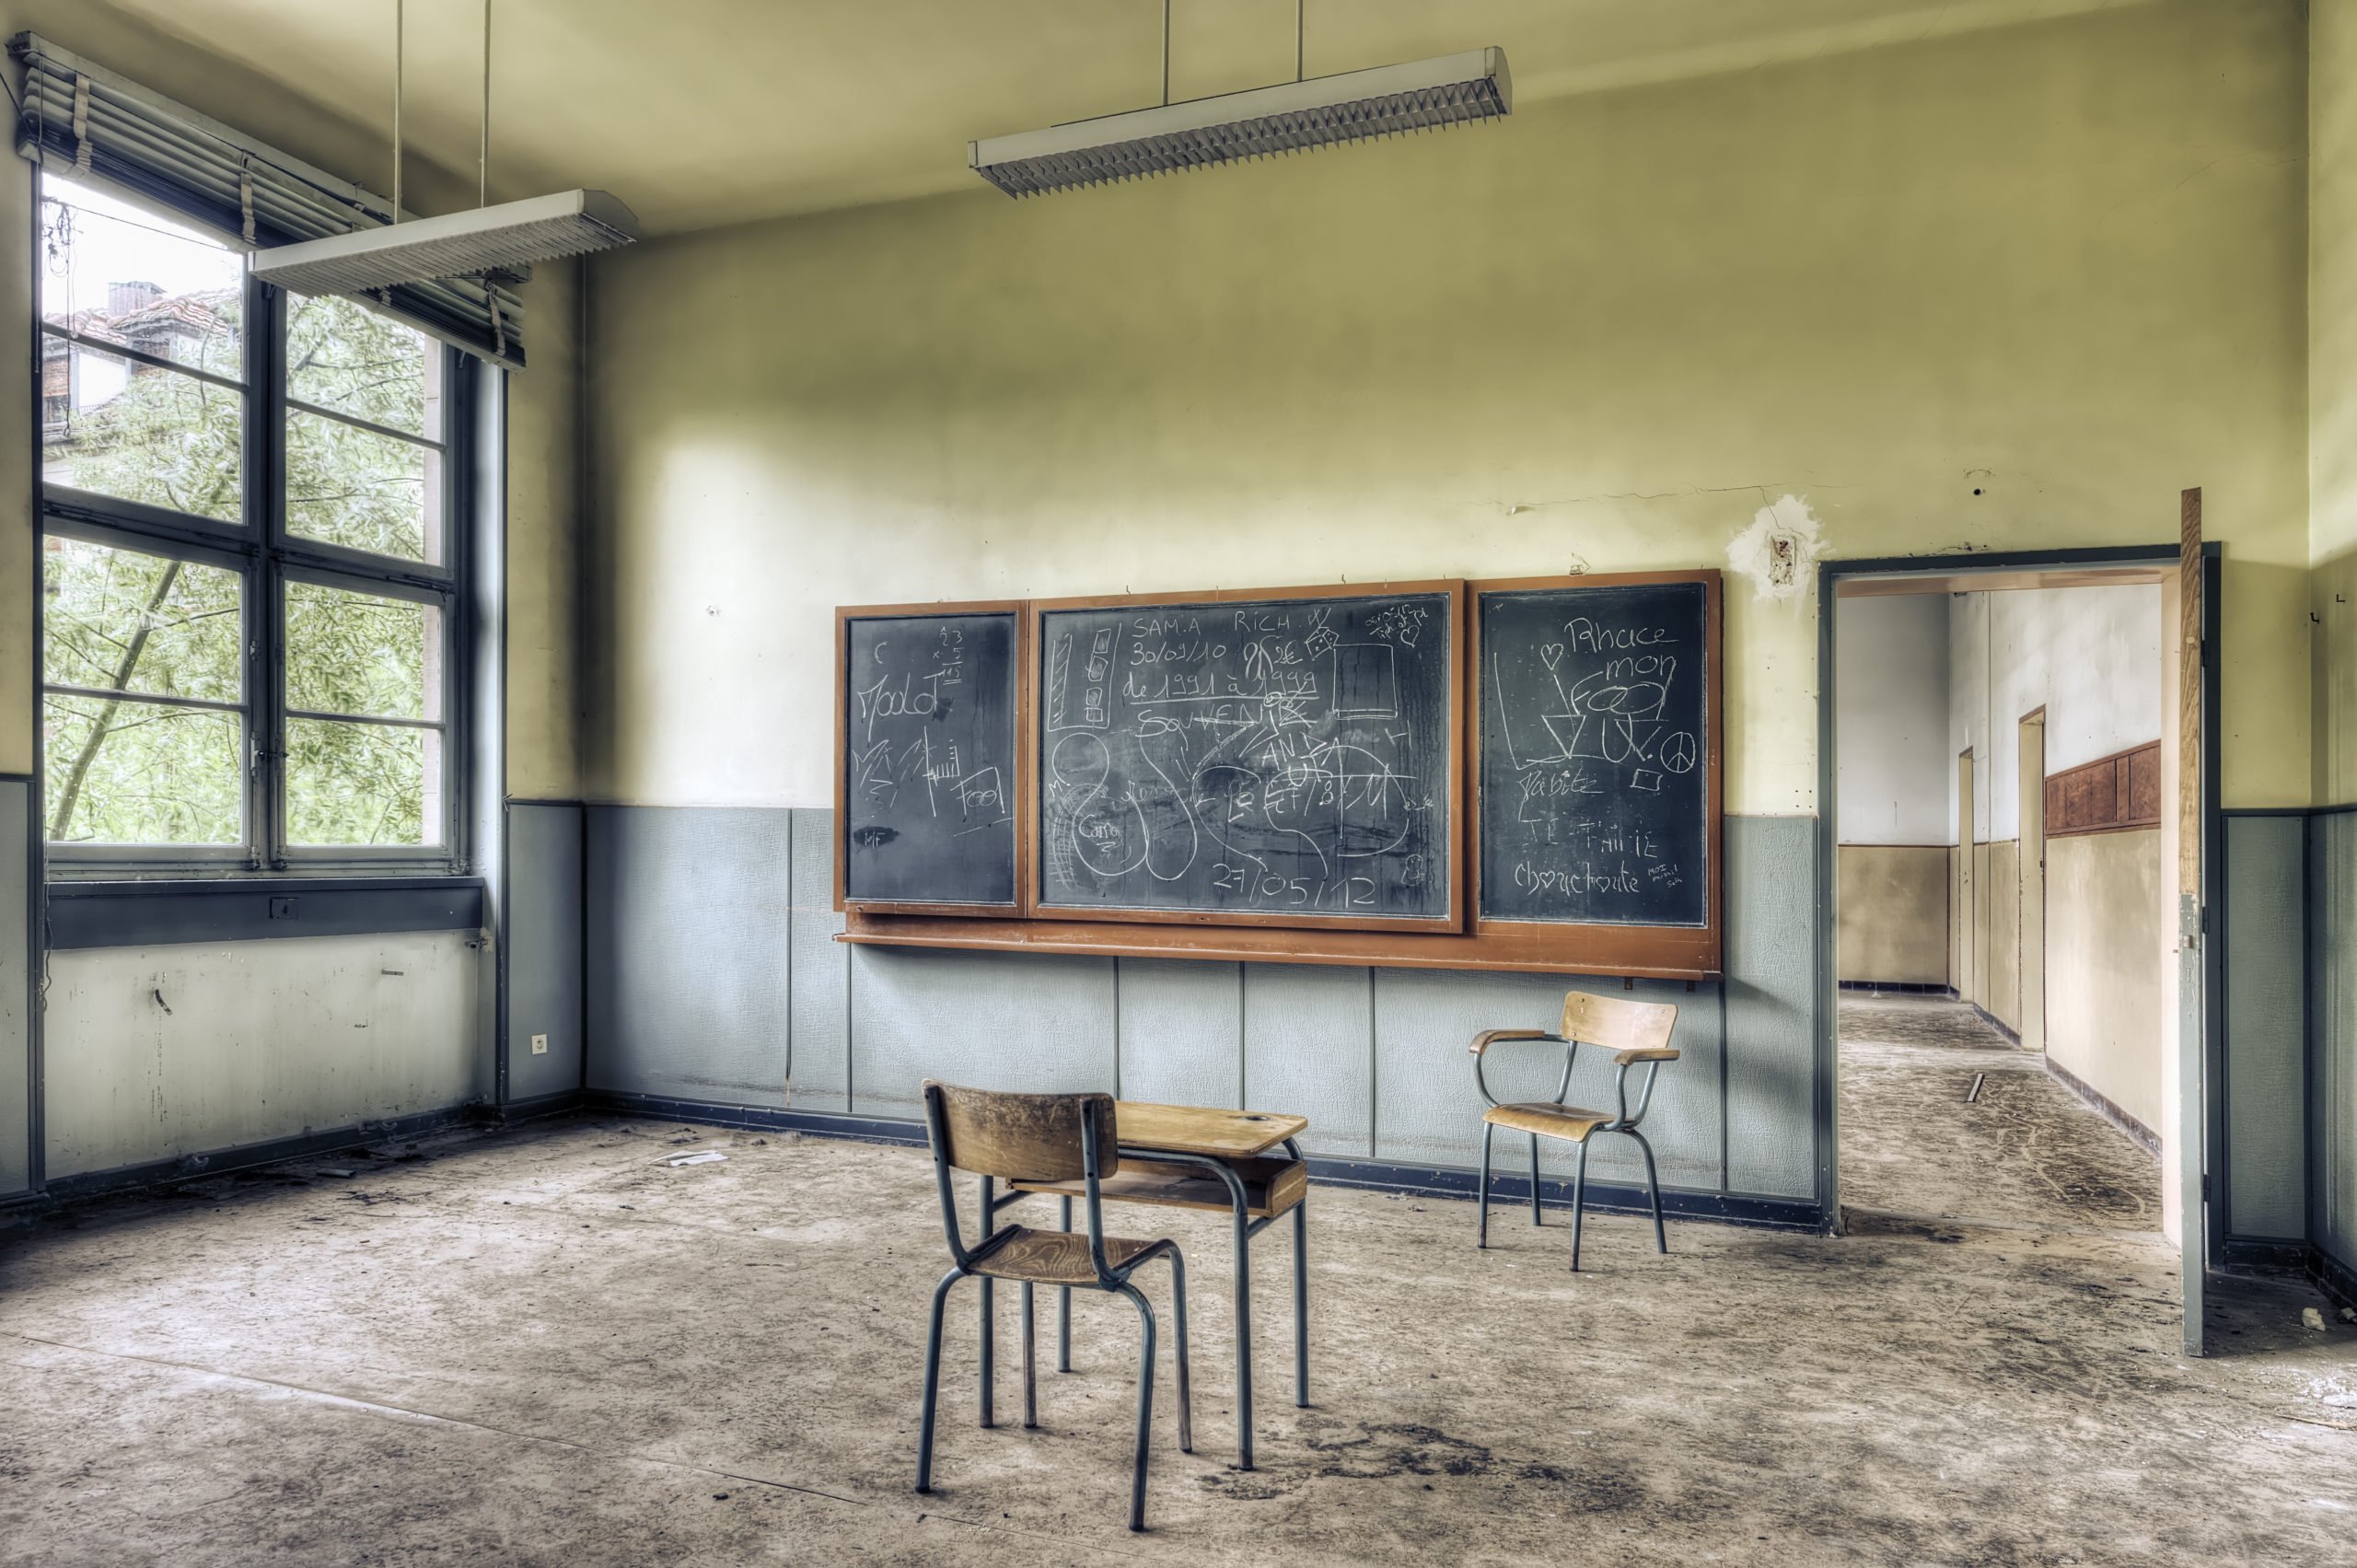 A dusty abandoned classroom, with a worn out looking blackboard, one battered desk-chair and another single chair. A doorway leads into another abandoned room.